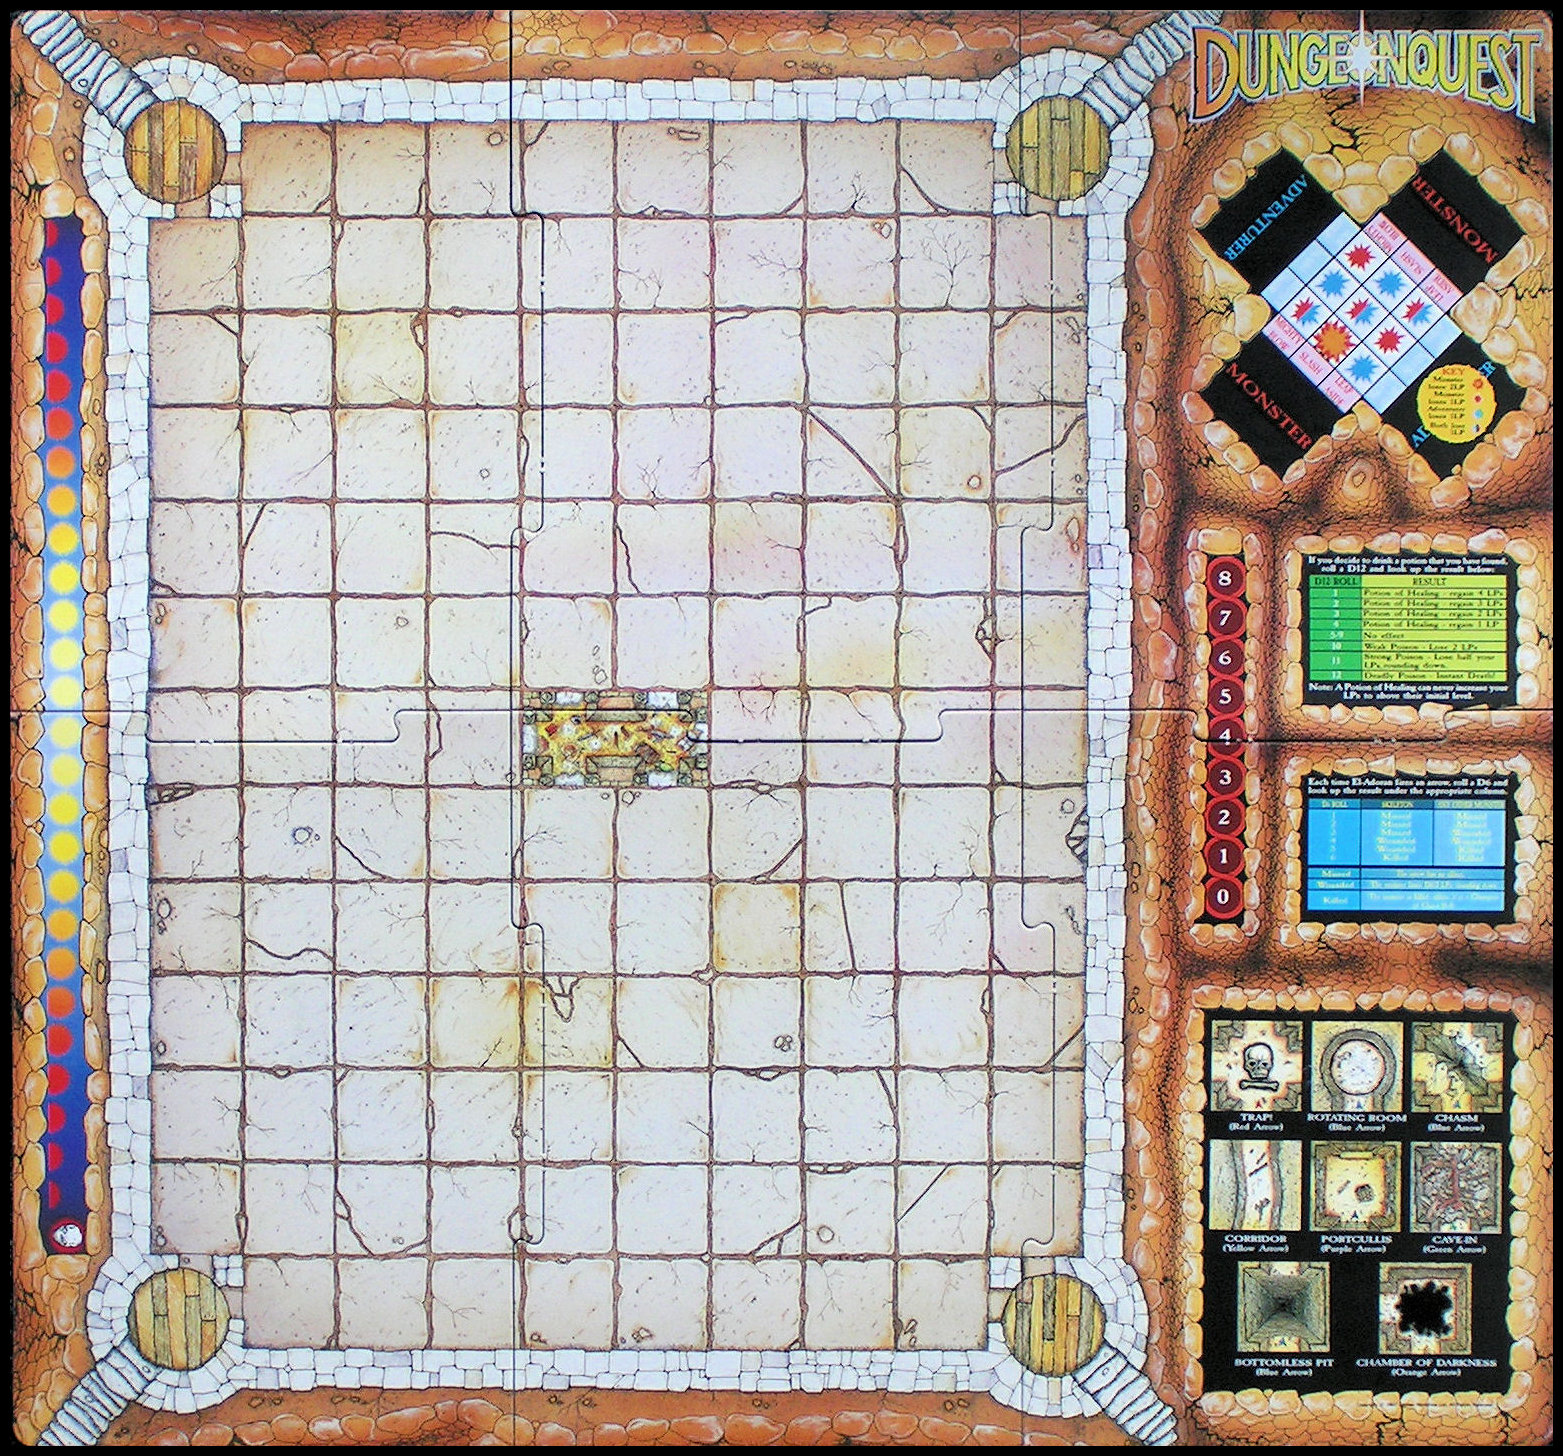 Dungeonquest - Game Board